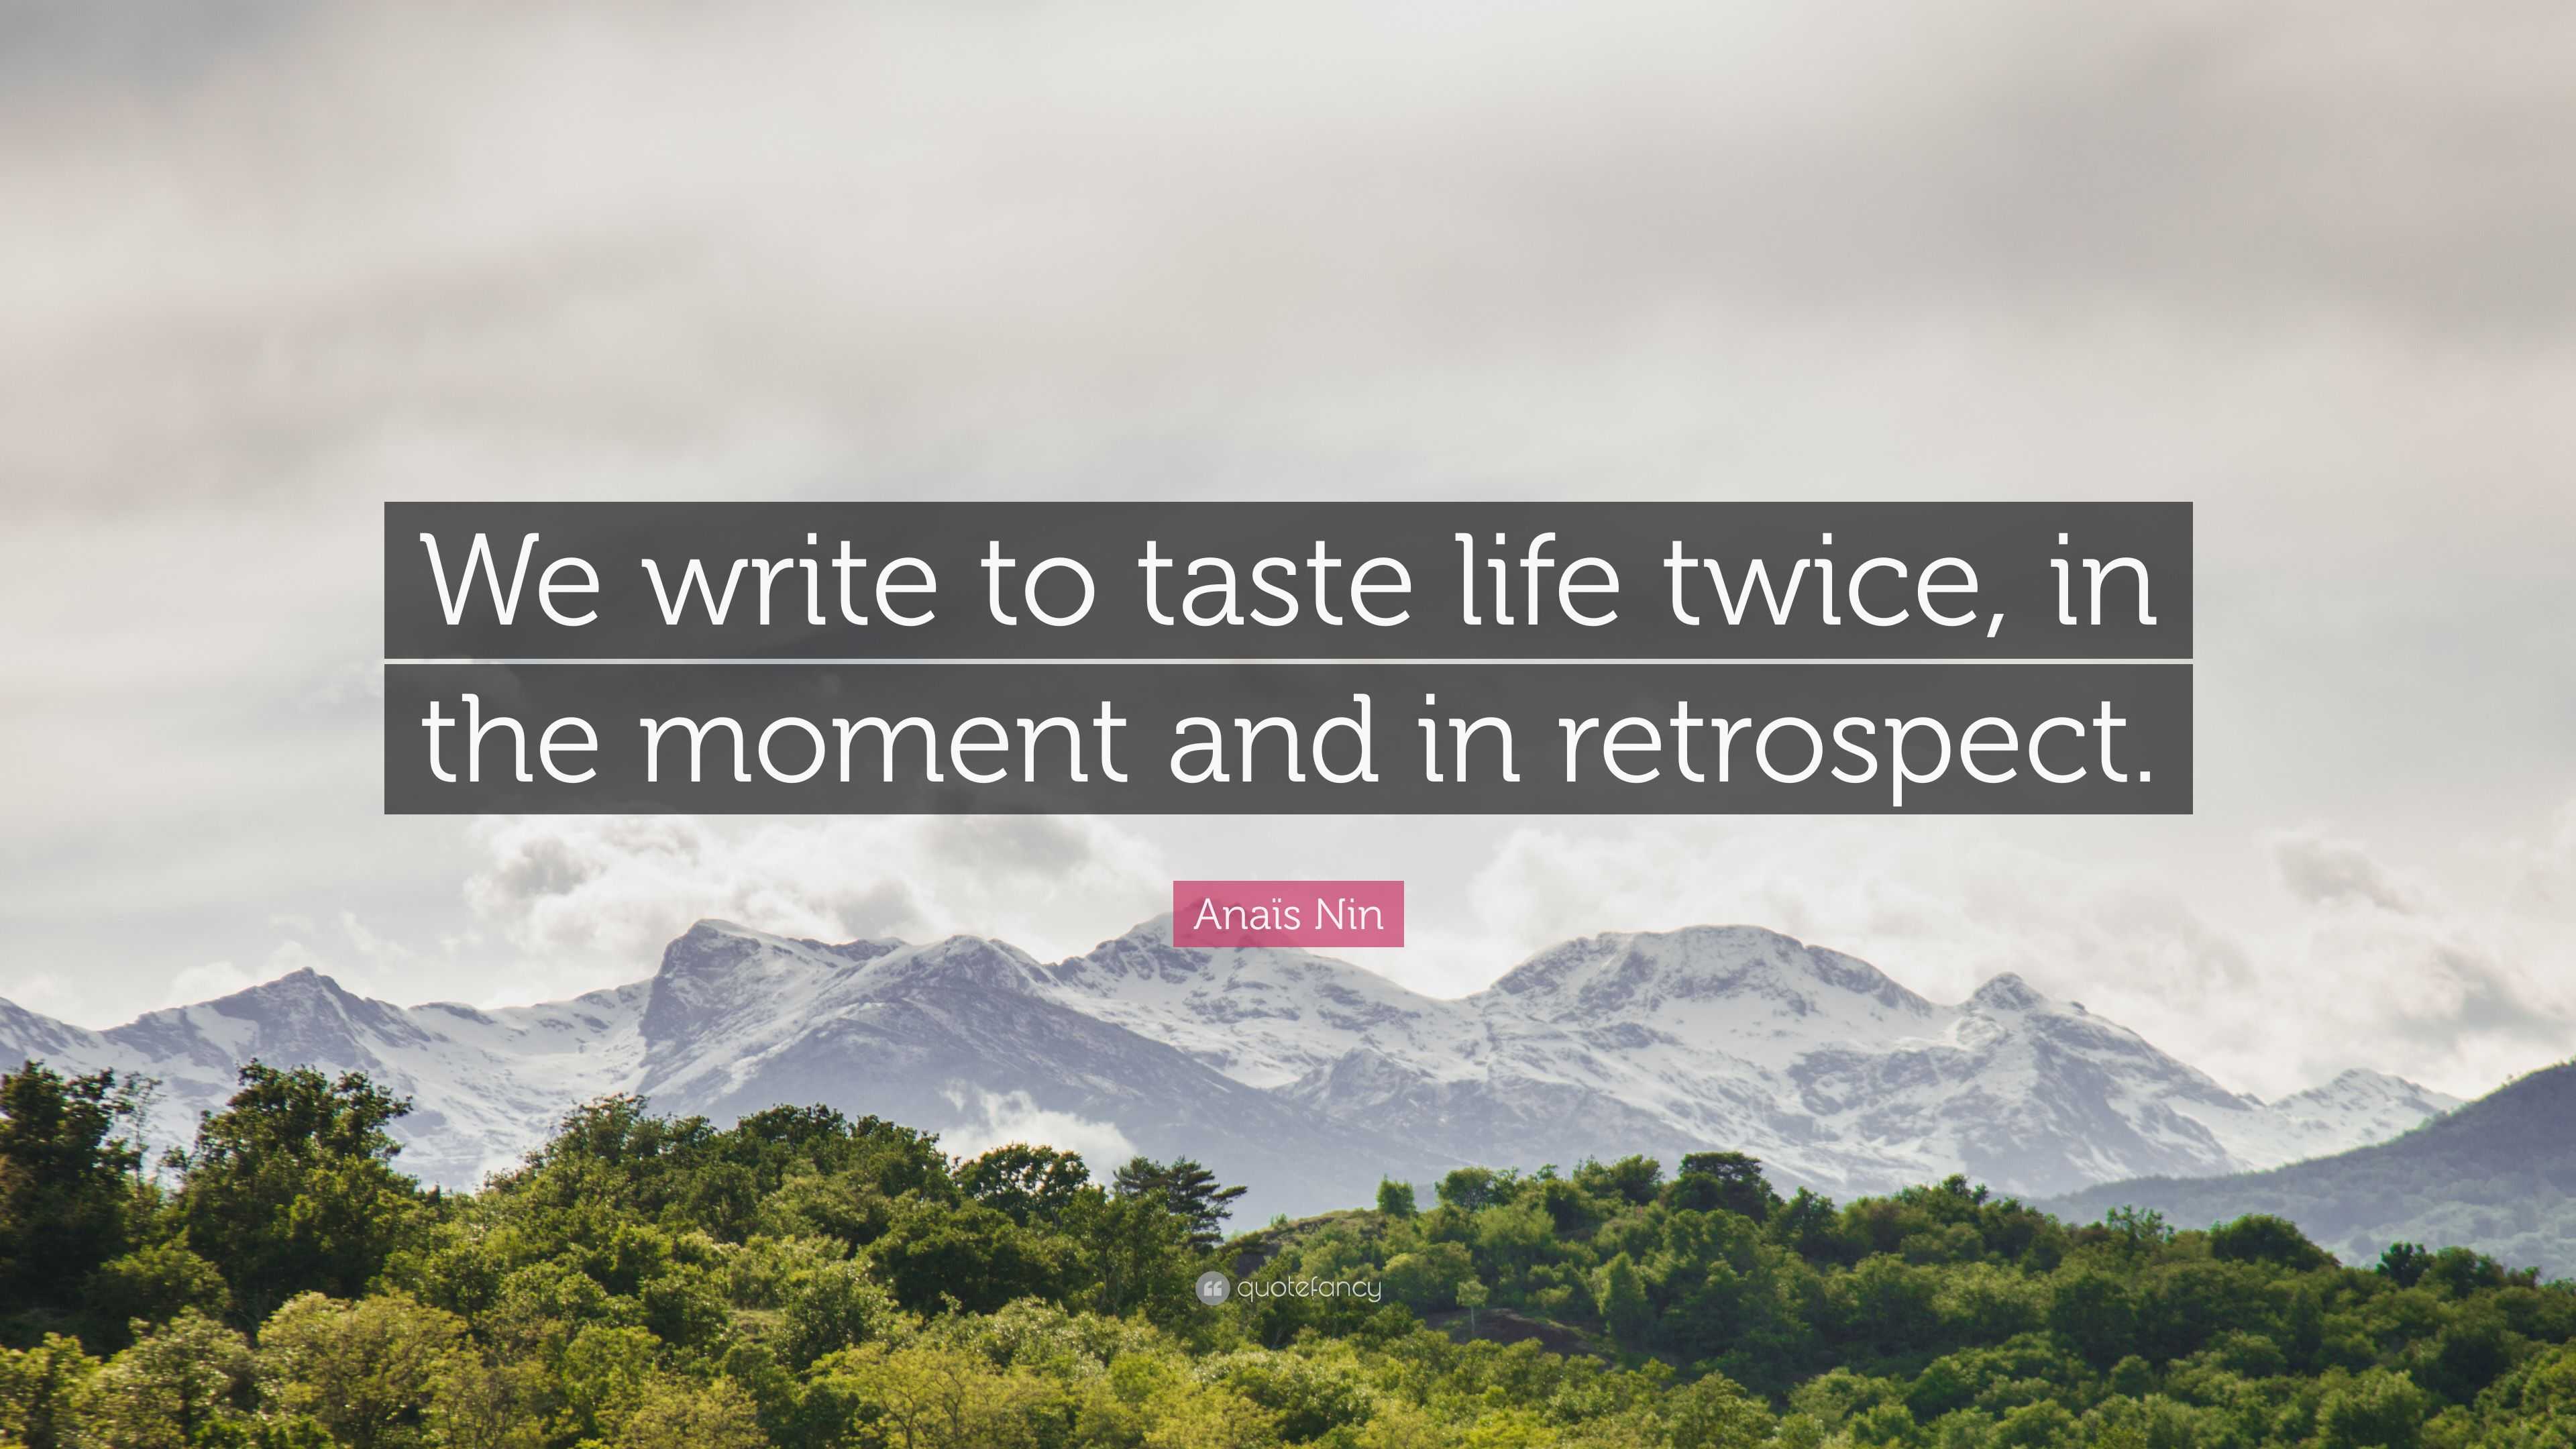 https://quotefancy.com/media/wallpaper/3840x2160/2015615-Ana-s-Nin-Quote-We-write-to-taste-life-twice-in-the-moment-and-in.jpg